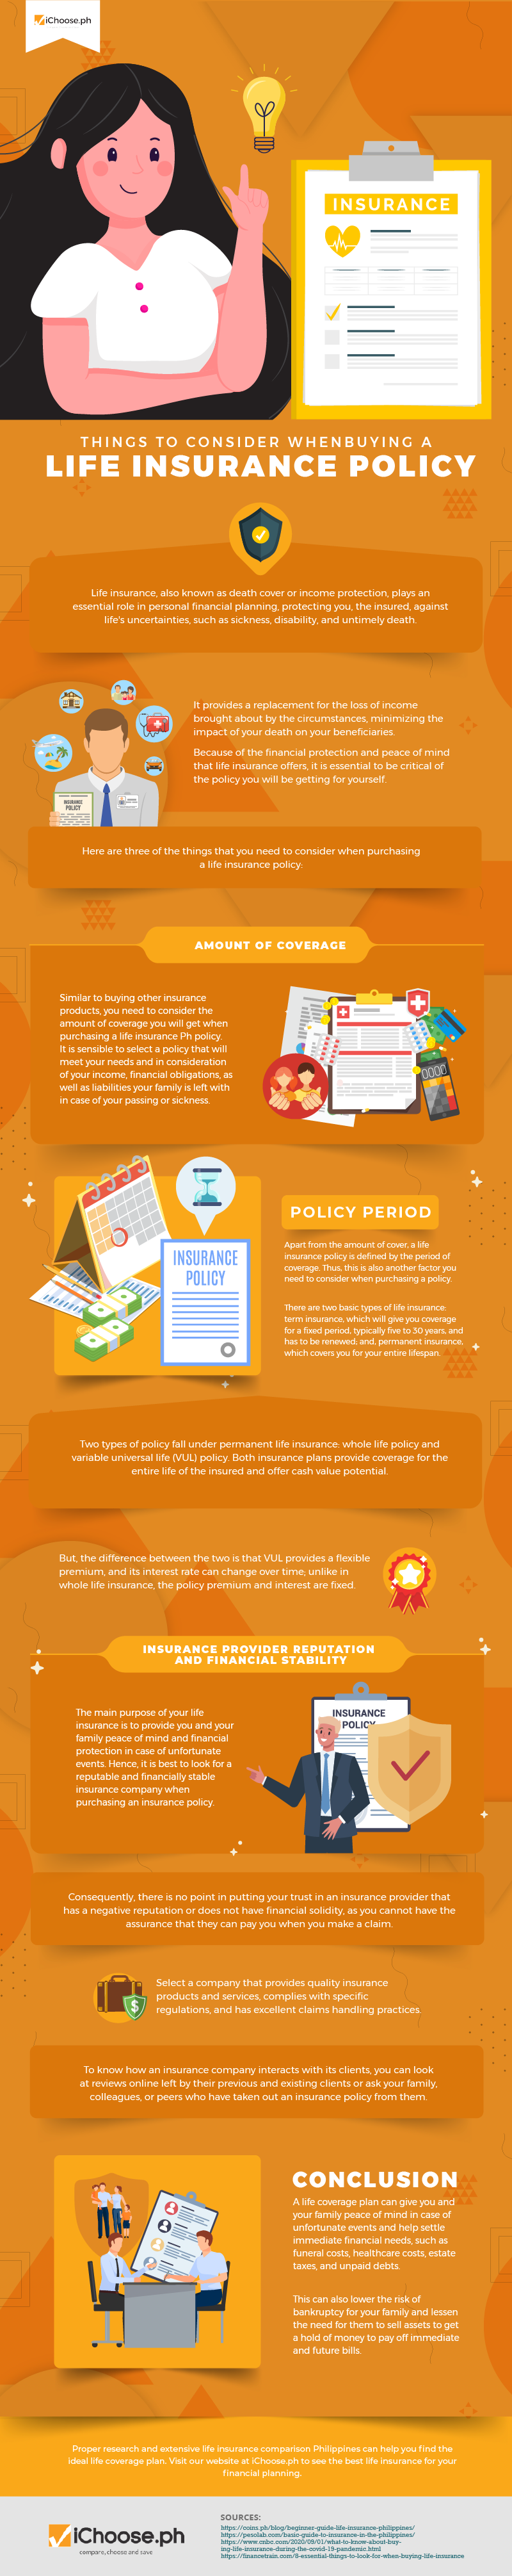 Things-to-Consider-When-Buying-a-Life-Insurance-Policy-philippines-ph-infographic